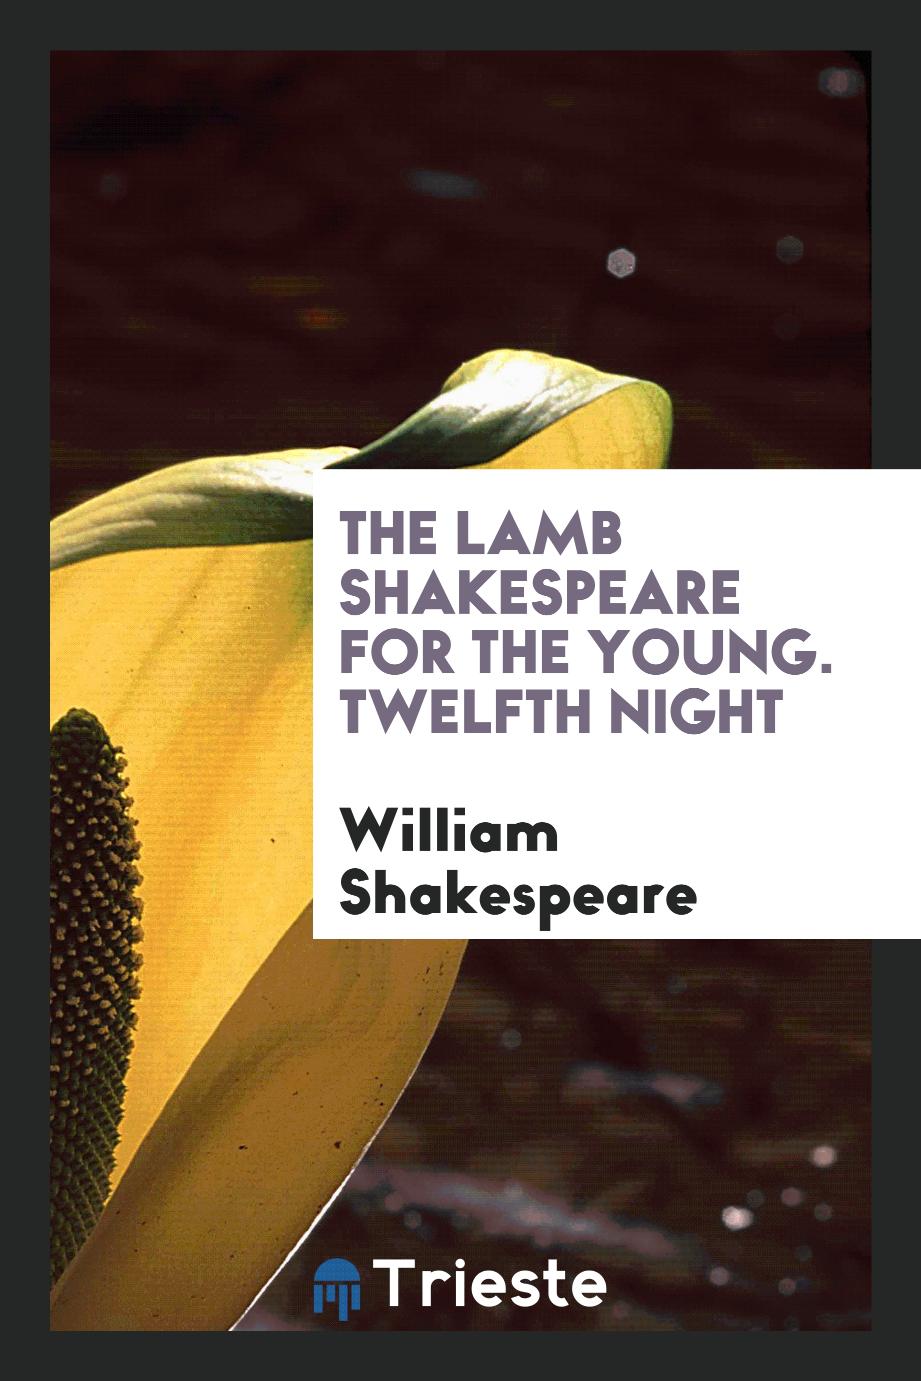 The lamb Shakespeare for the Young. Twelfth Night